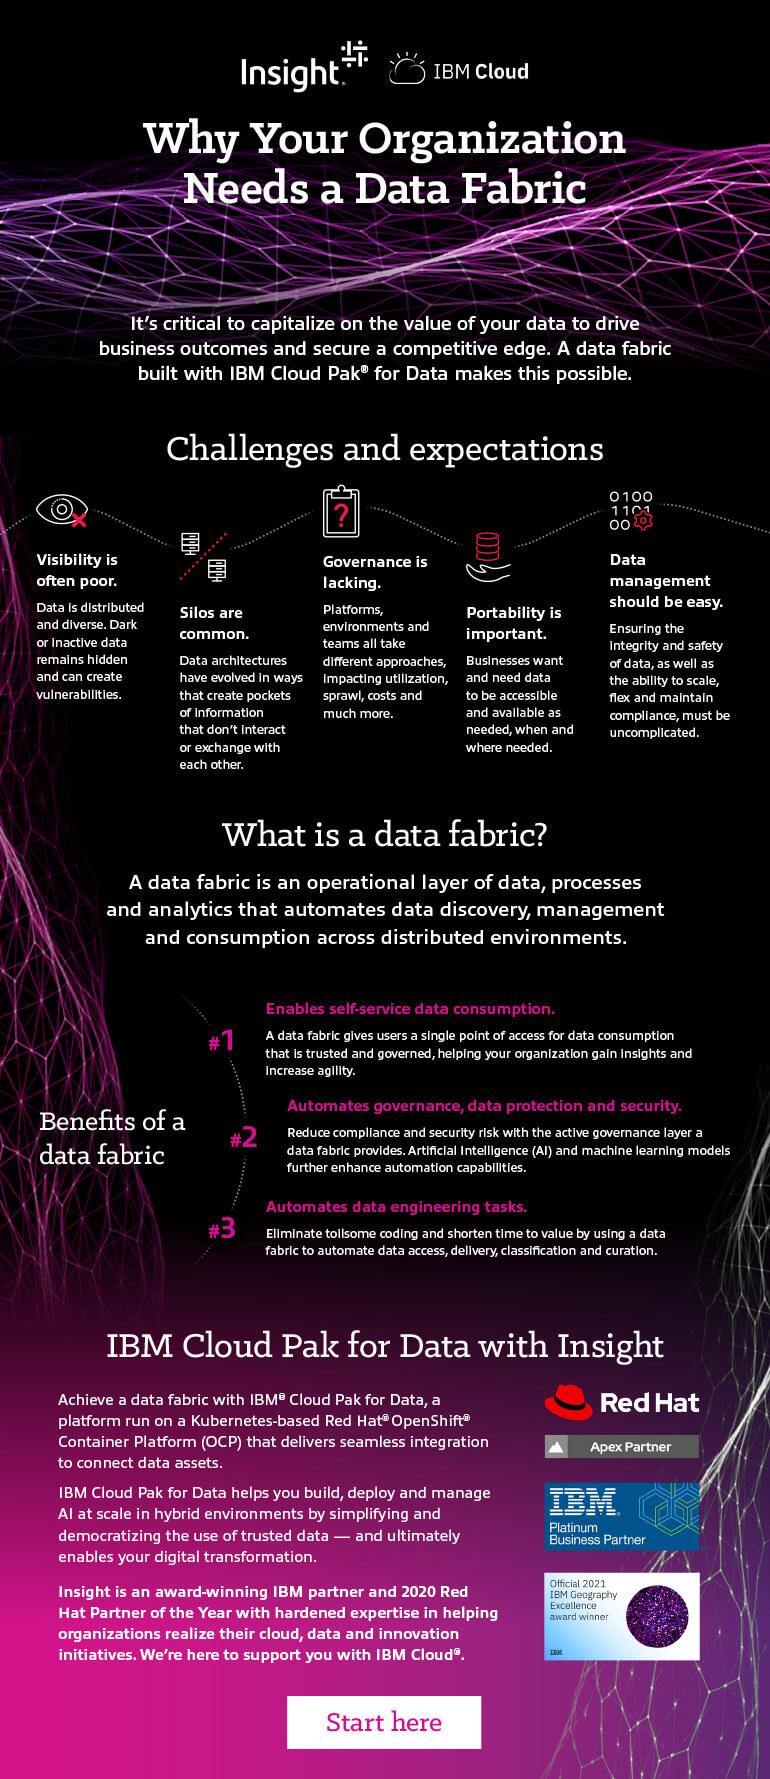 IBM Why Your Organization Needs a Data Fabric Infographic as translated below